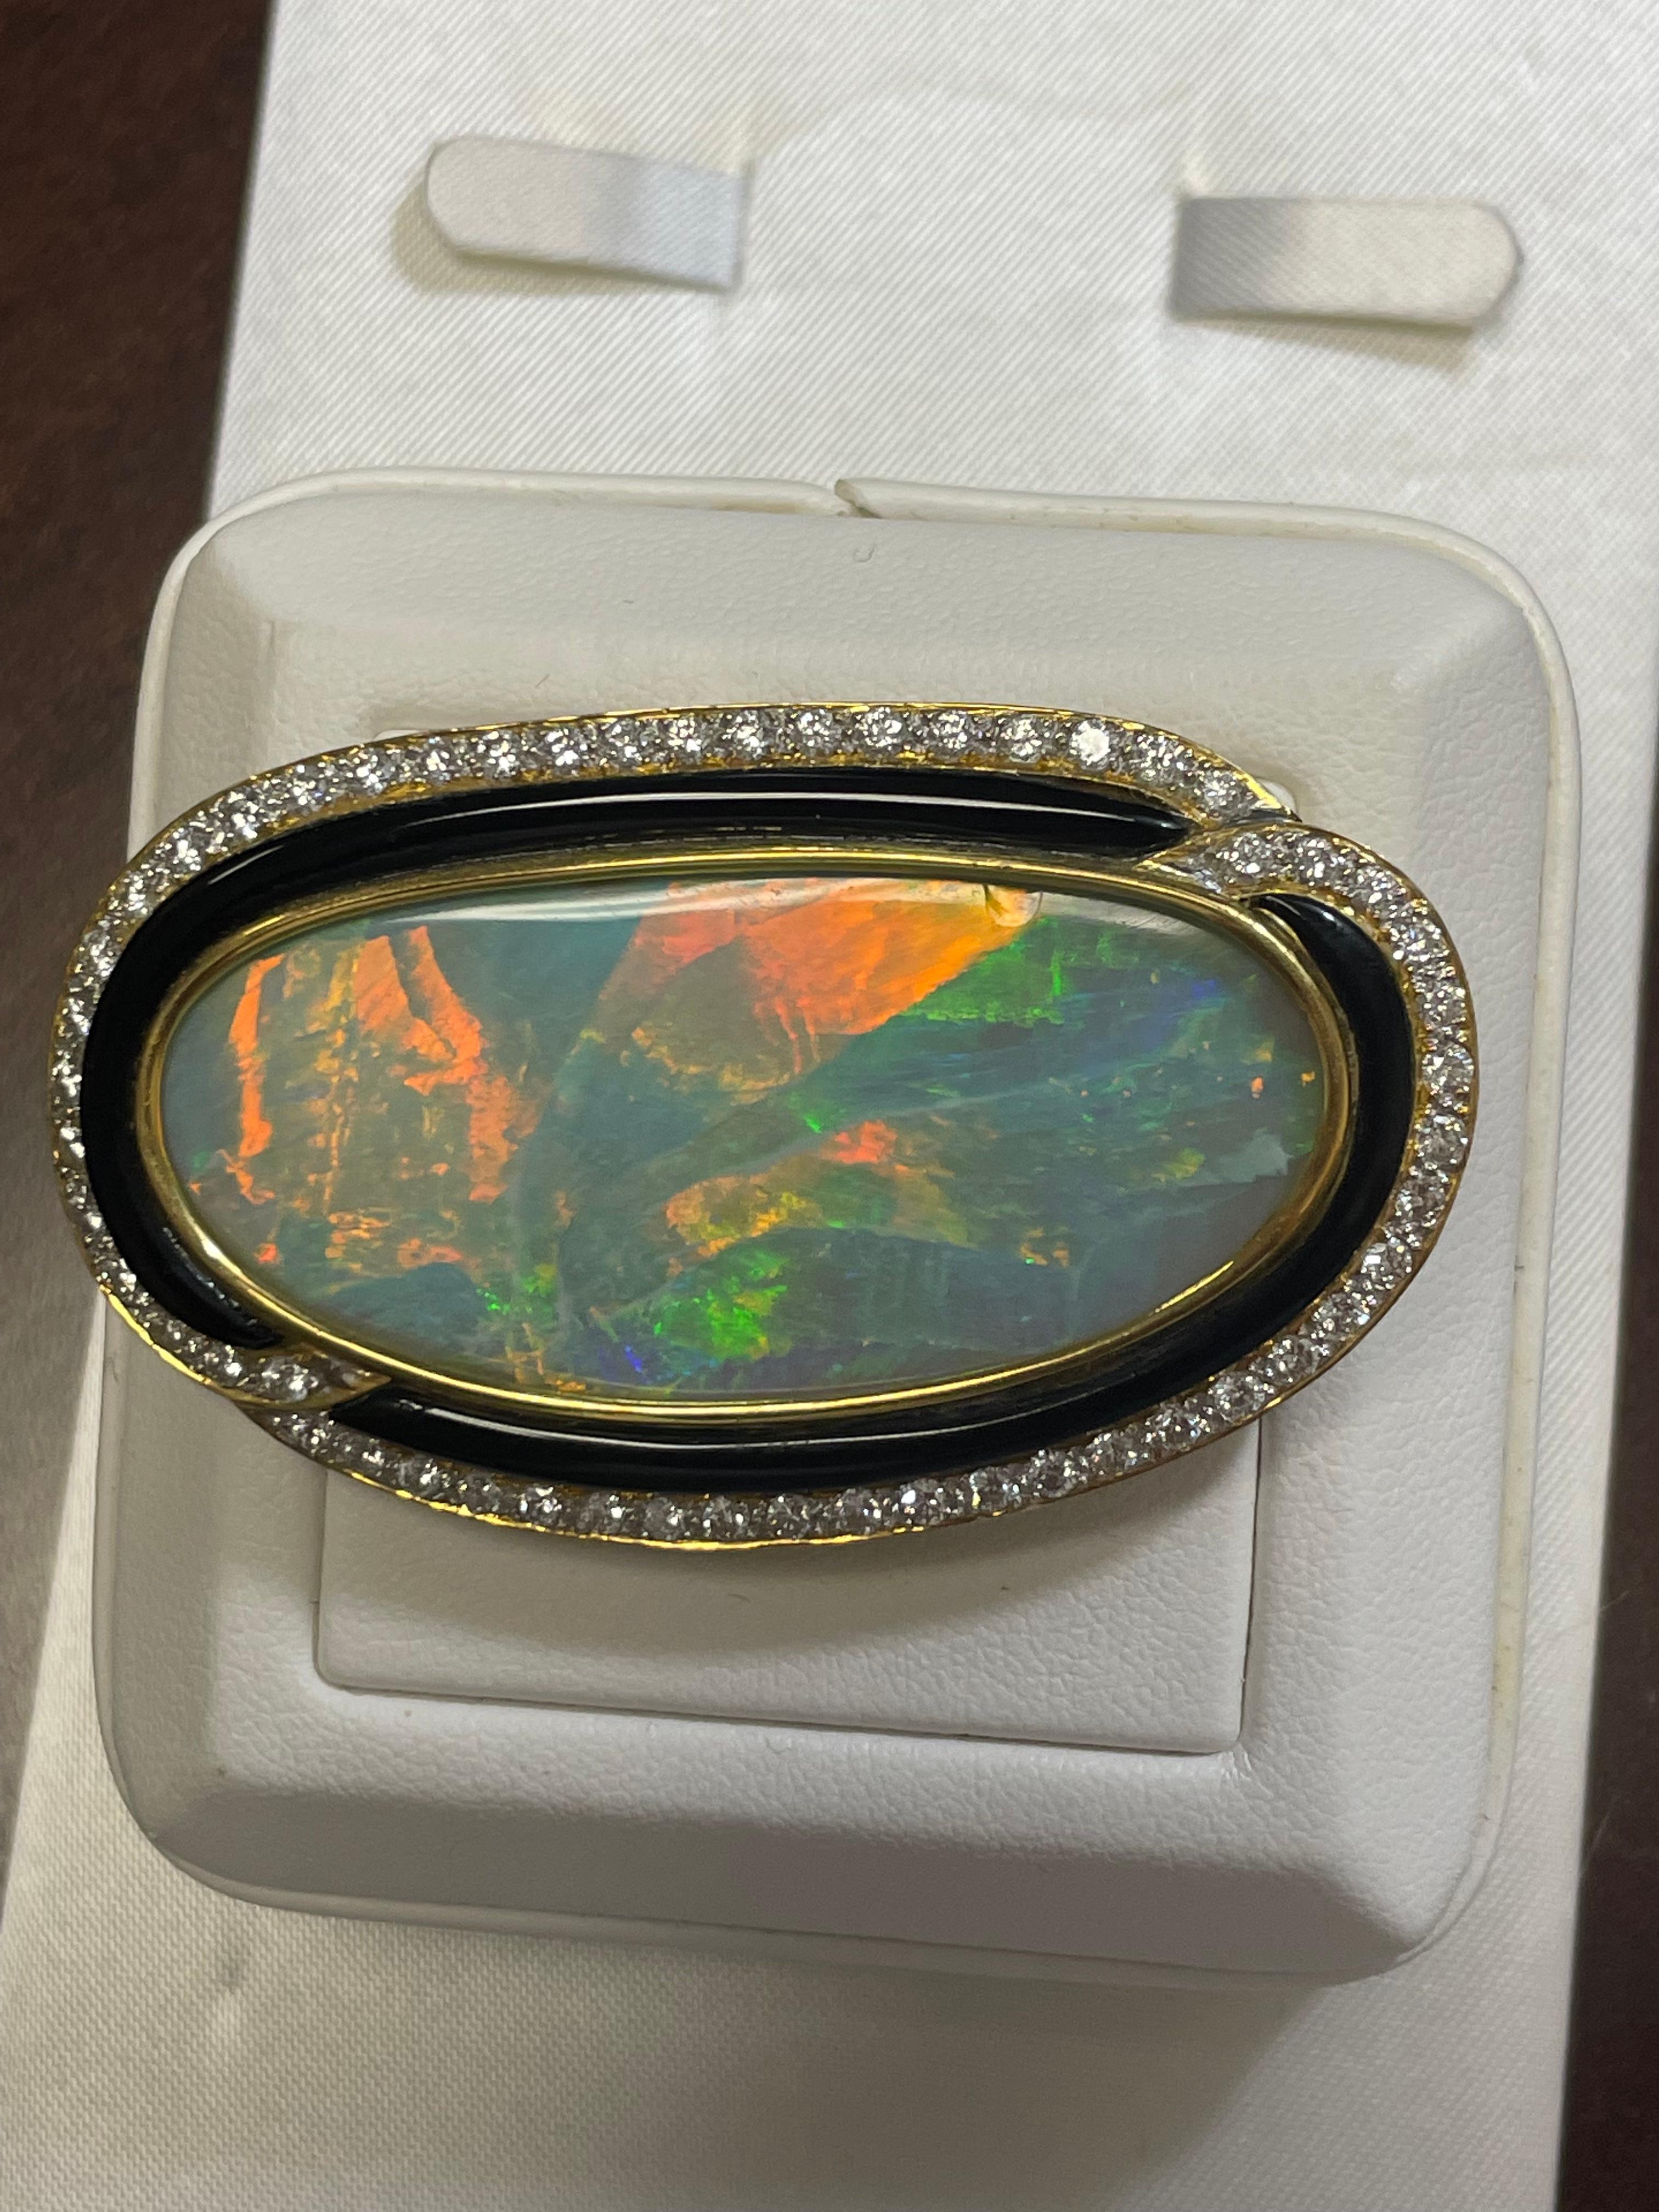 One lady's semi-black peacock opal with multicolor fire pattern.  Saturation scale is vivid with a large flash fire pattern.  Extremely bright with cabochon, oval shape.  Measurements are 46.0 mm x 21.0 mm. 54 round brilliant cut diamonds measuring